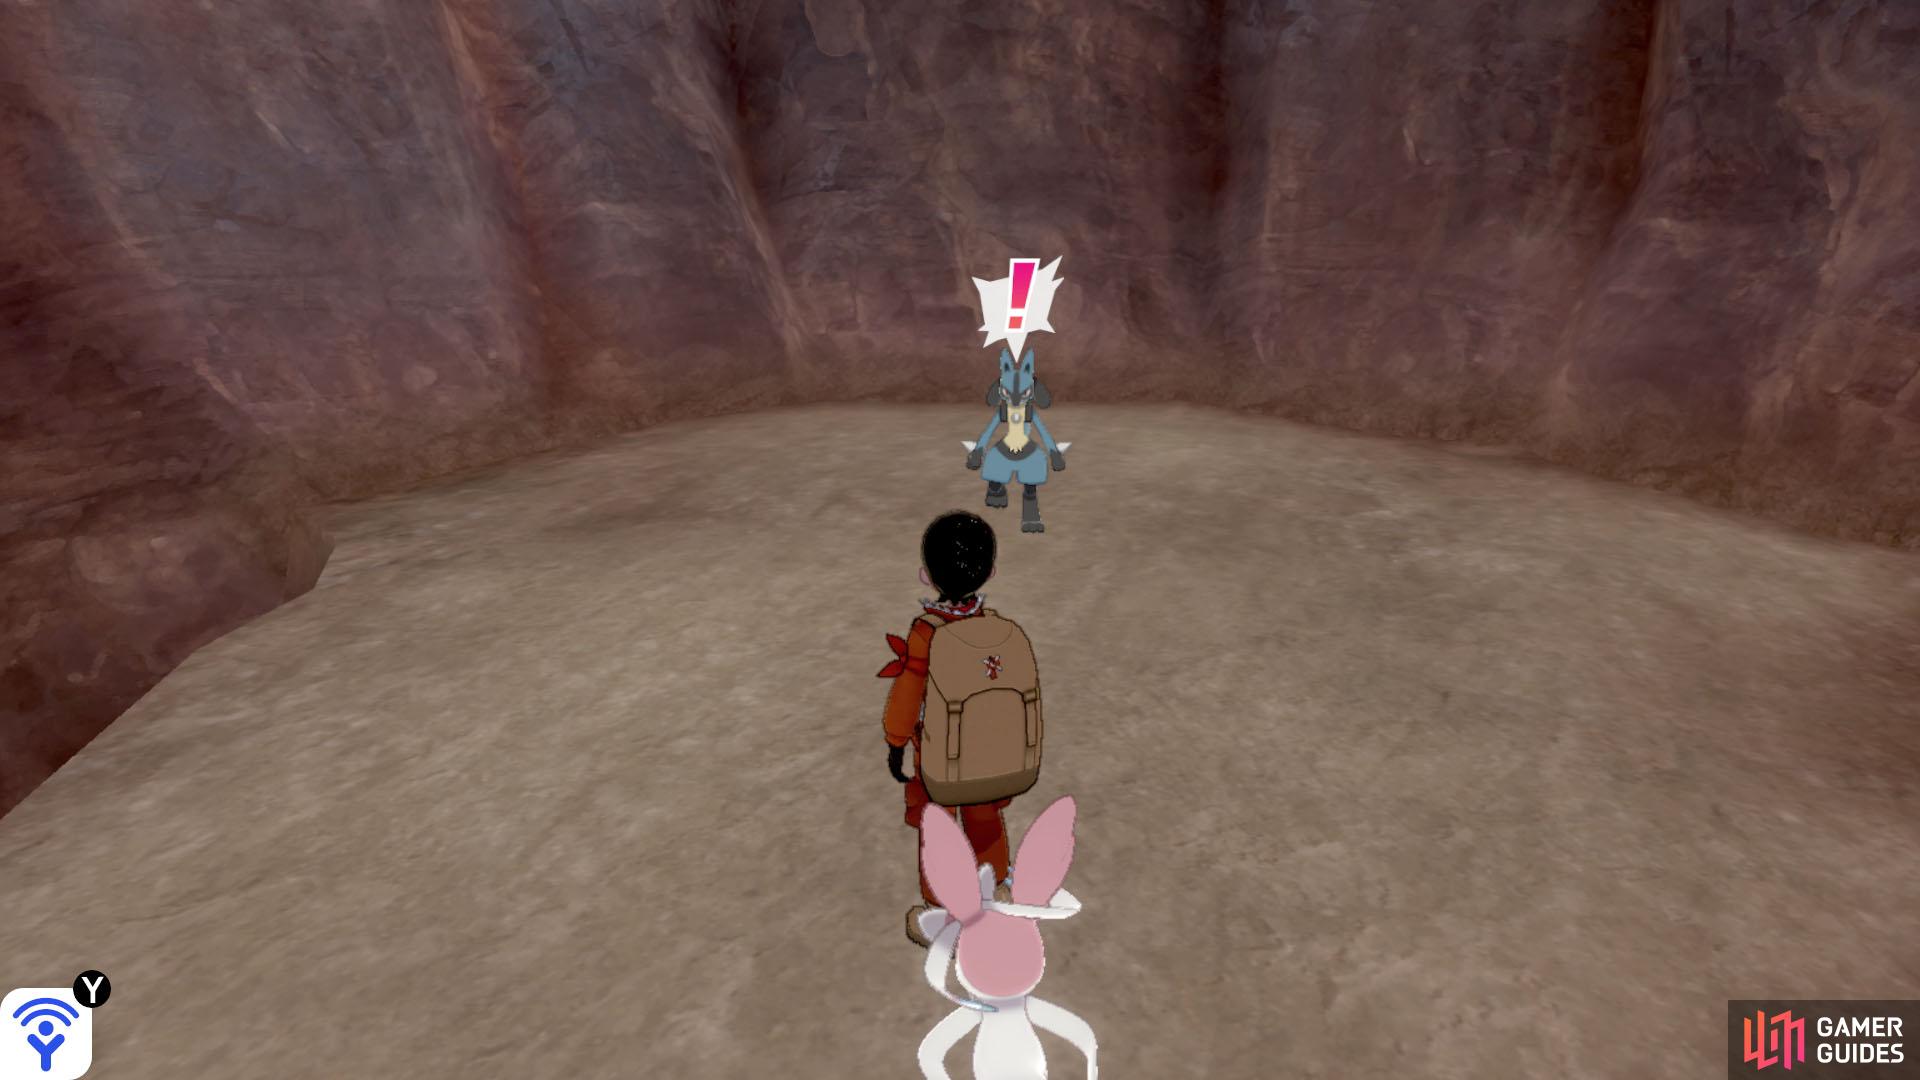 You haven’t lived until you’ve been chased by a Lucario.